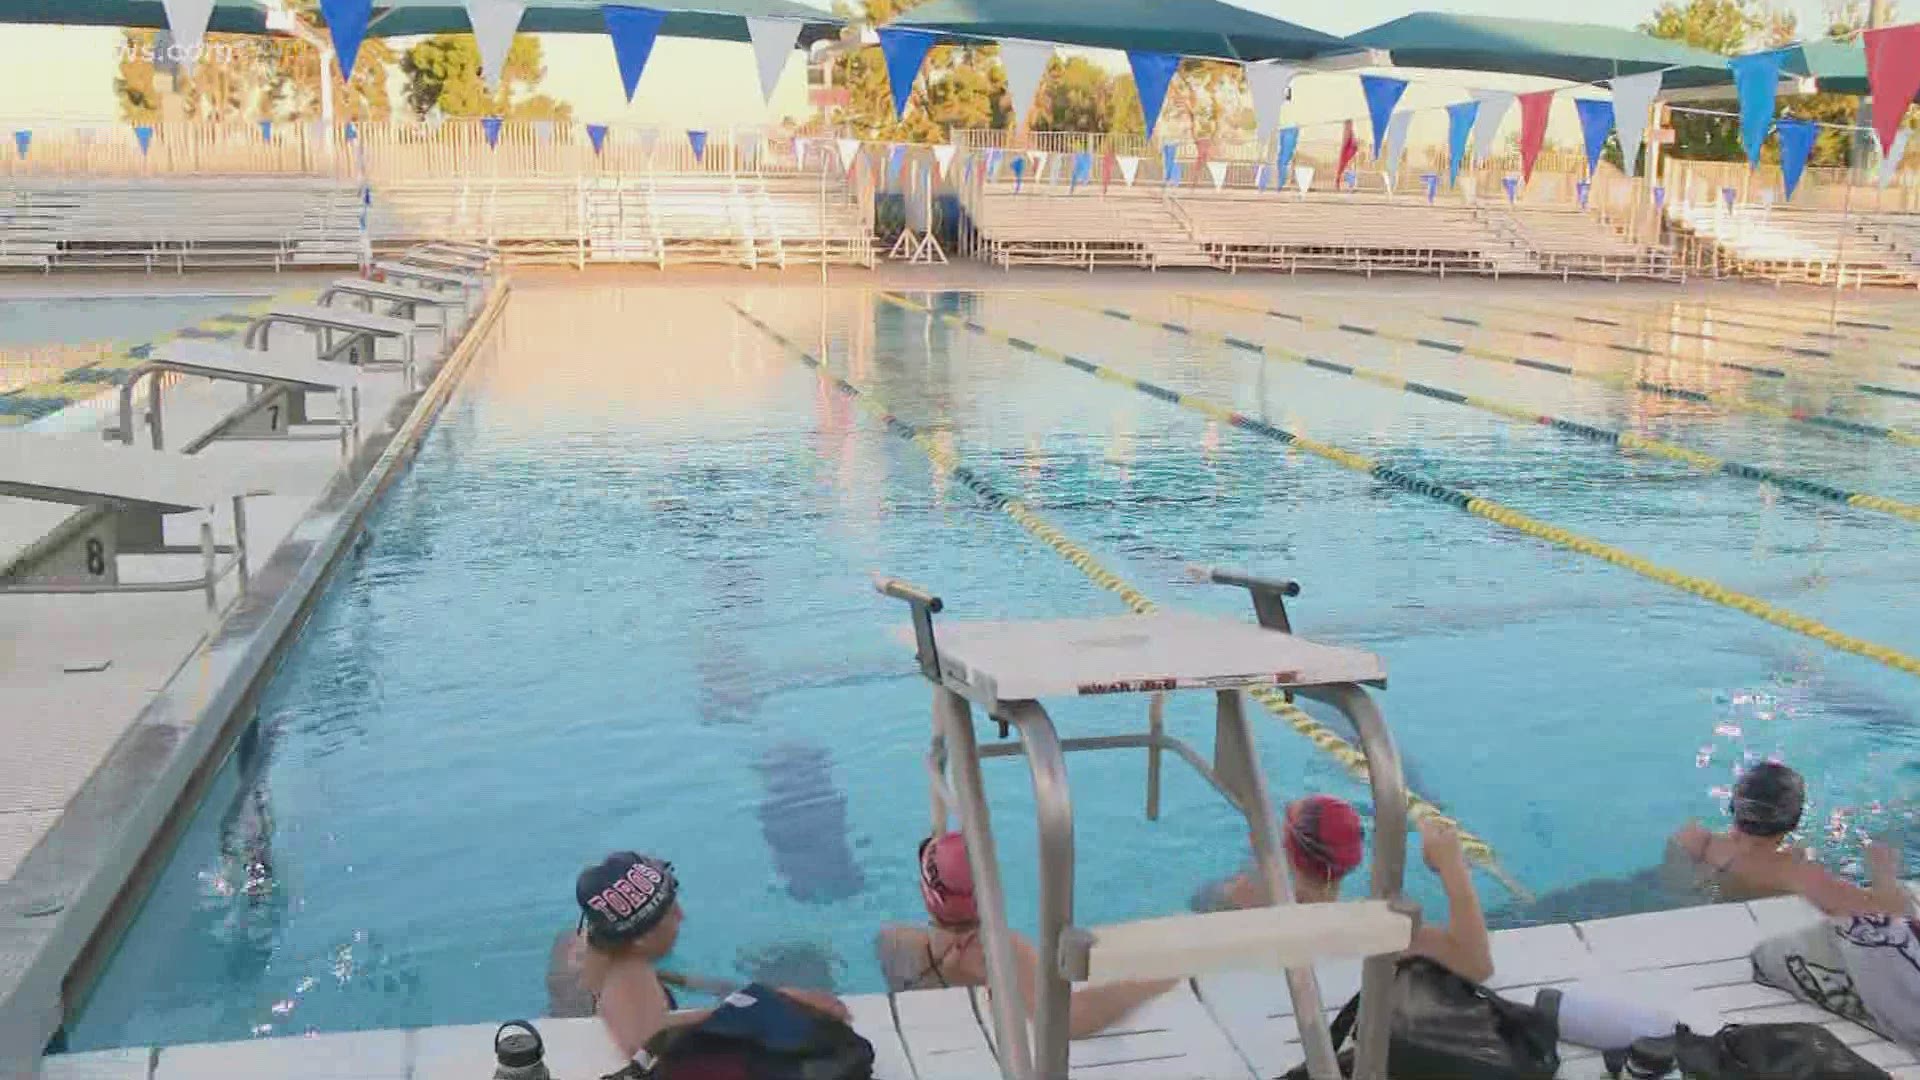 The City of Mesa will open its public pools on Saturday. Team 12's Mitch Carr gives us the details on pools opening for the summer.